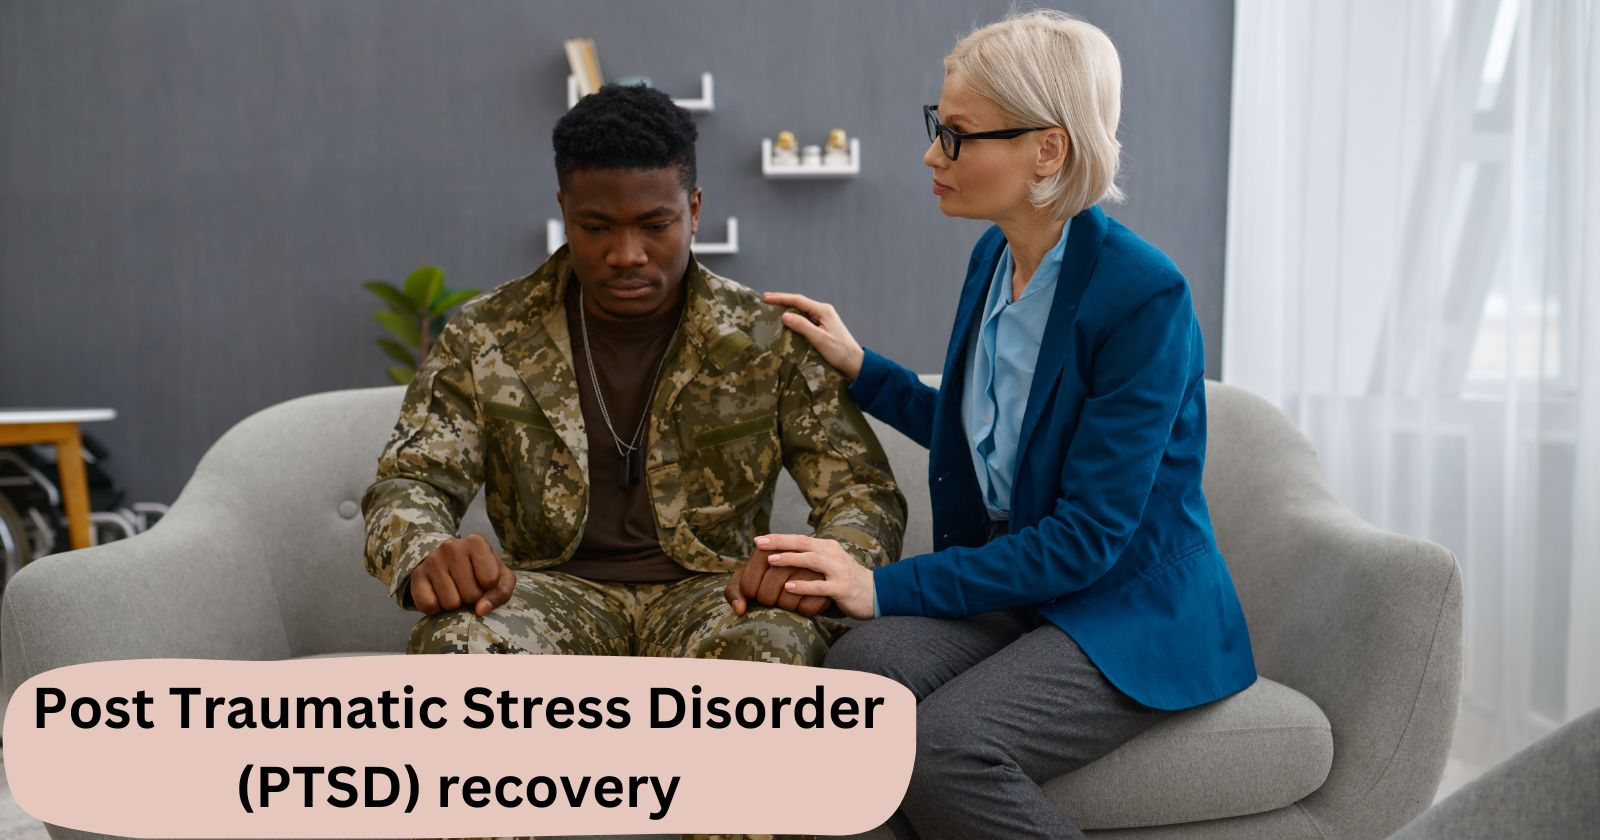 The 12 Steps and PTSD Recovery
Female doctor telling things to man veteran